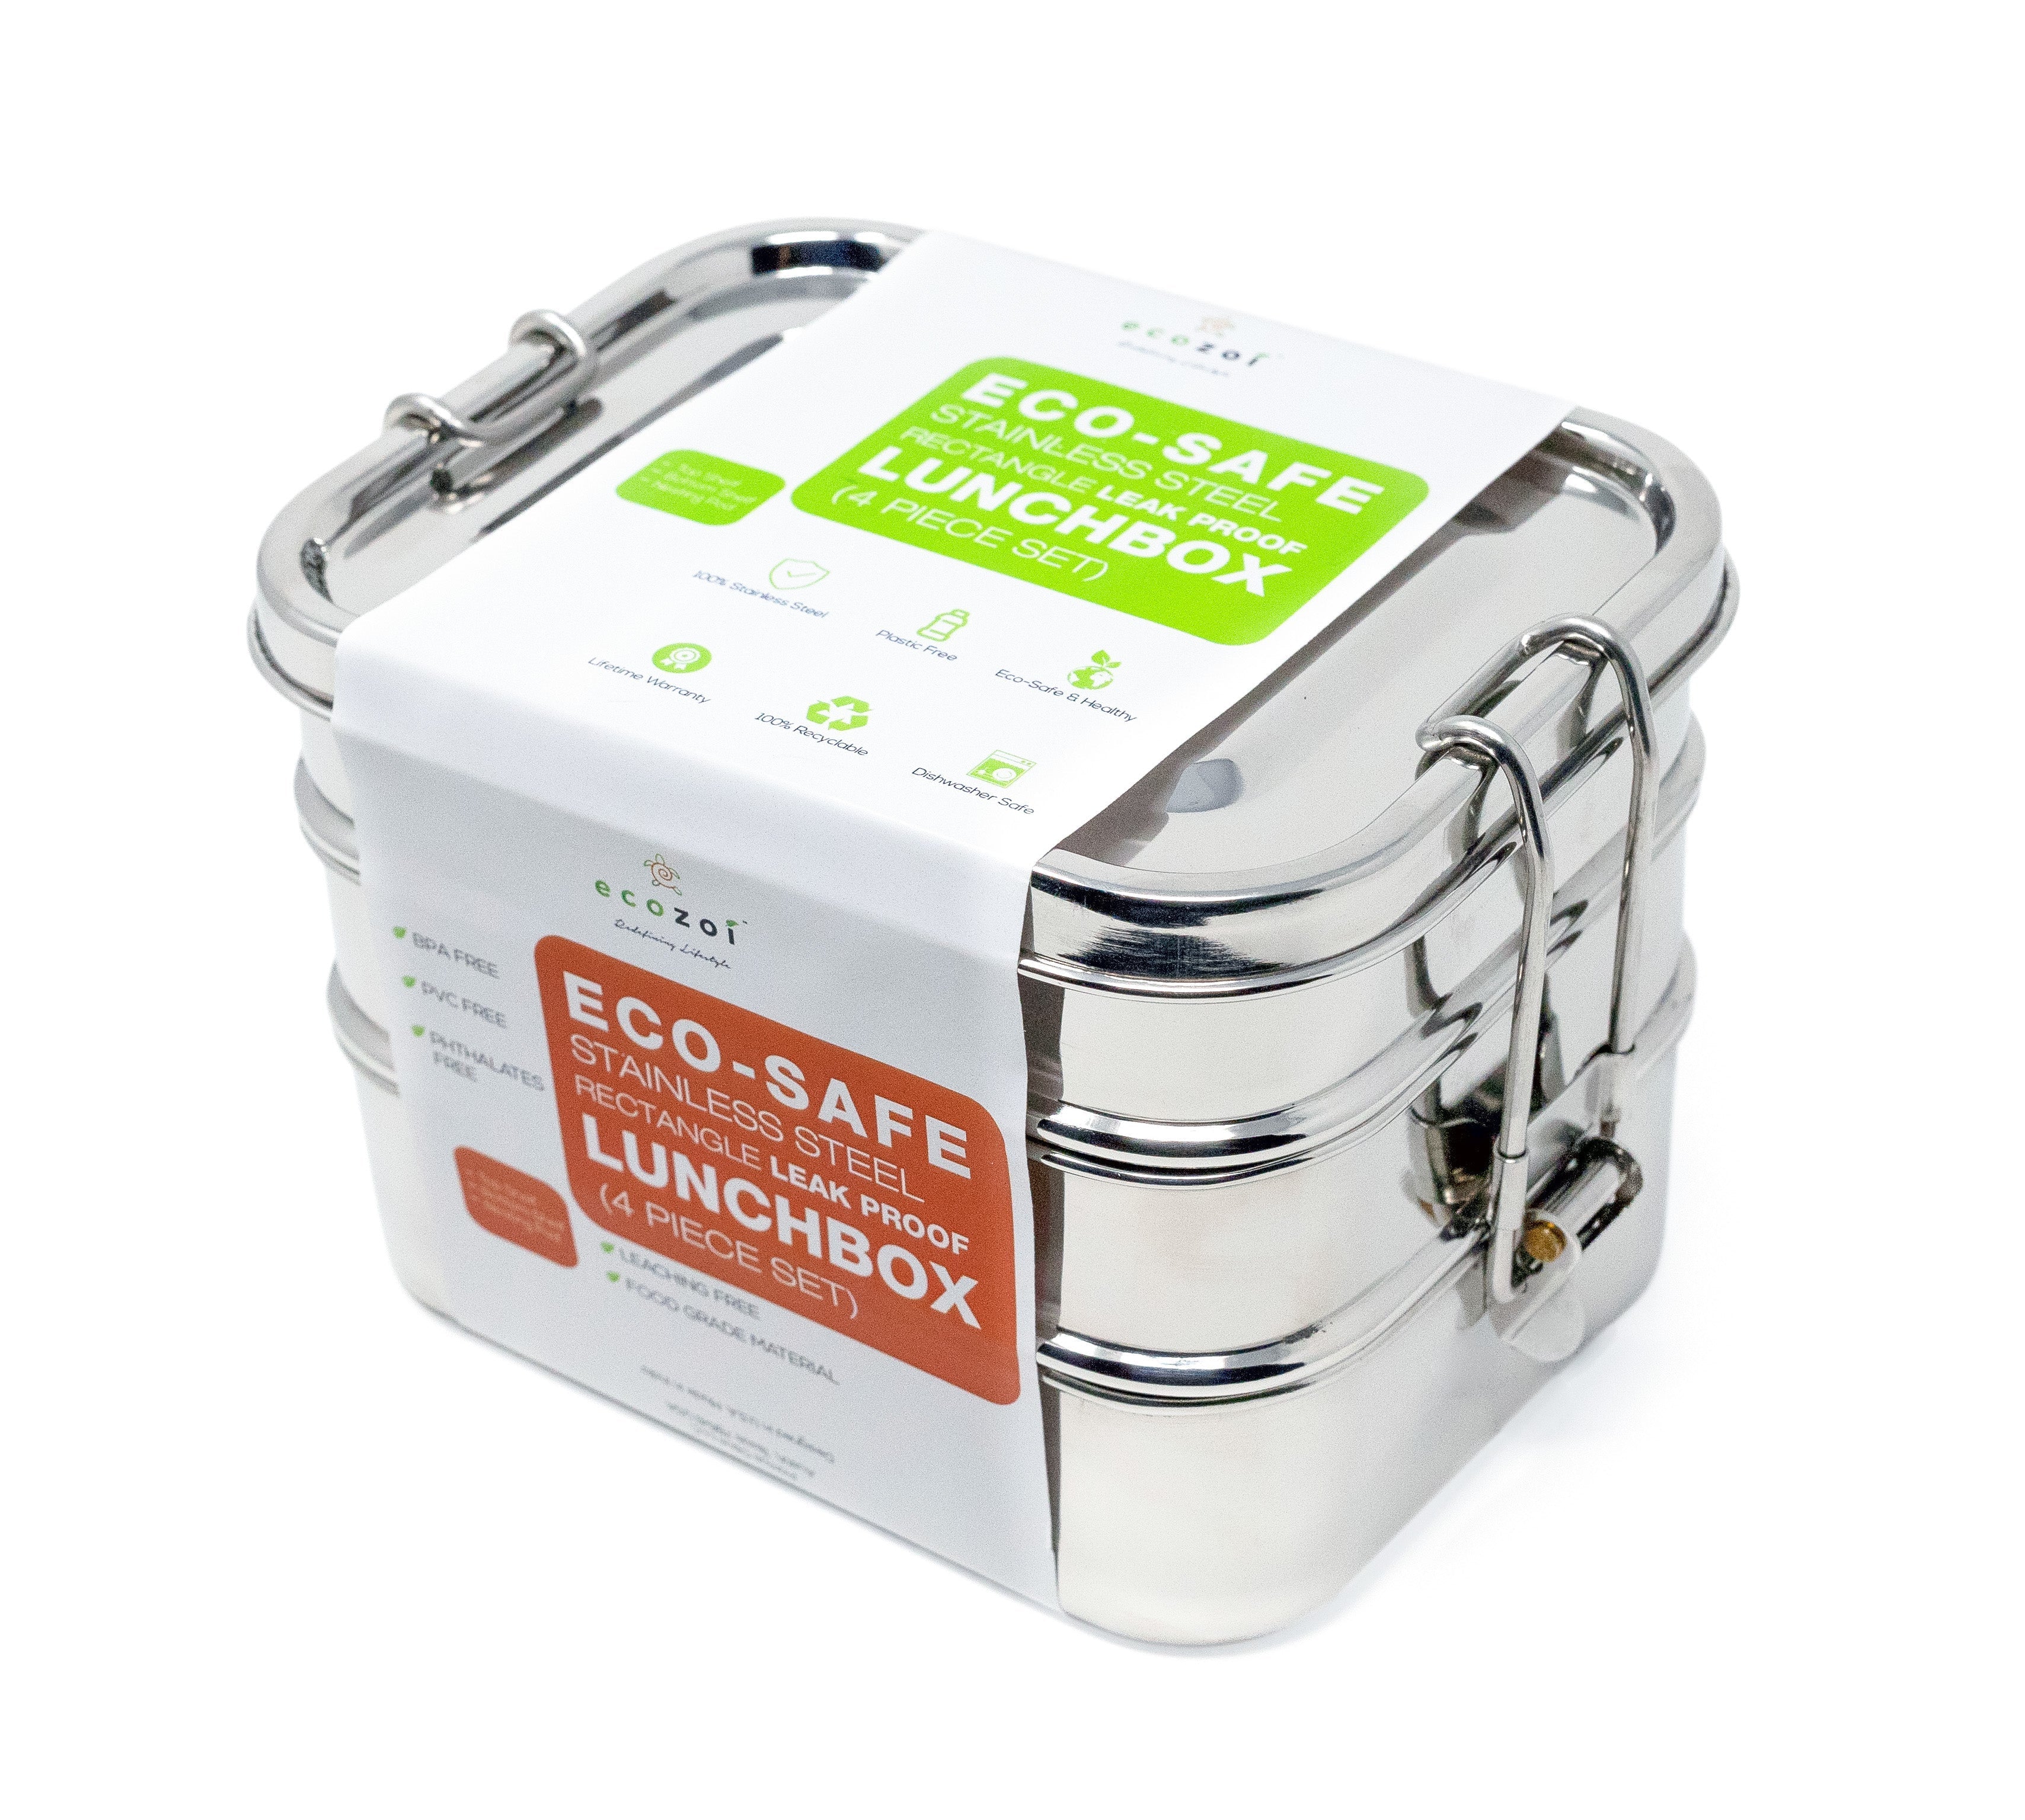 Stainless Steel 3-in-1 Bento Lunch Box + Free life-time Holds 6 Cups of Food Pod